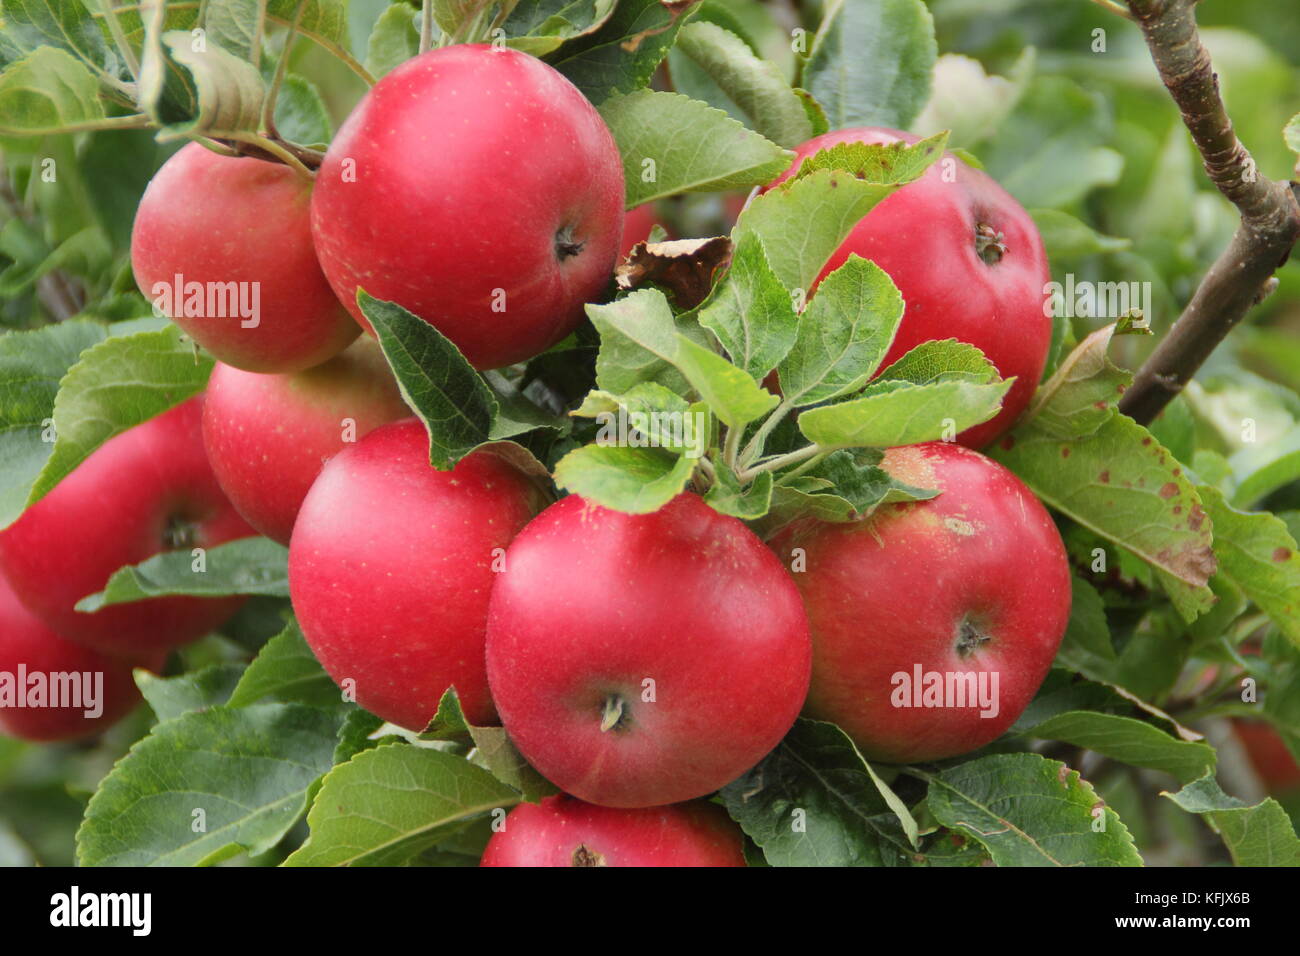 Malus domestica 'Discovery' apples, an early season dessert fruit, approaching maturity in an English garden in summer (August) Stock Photo